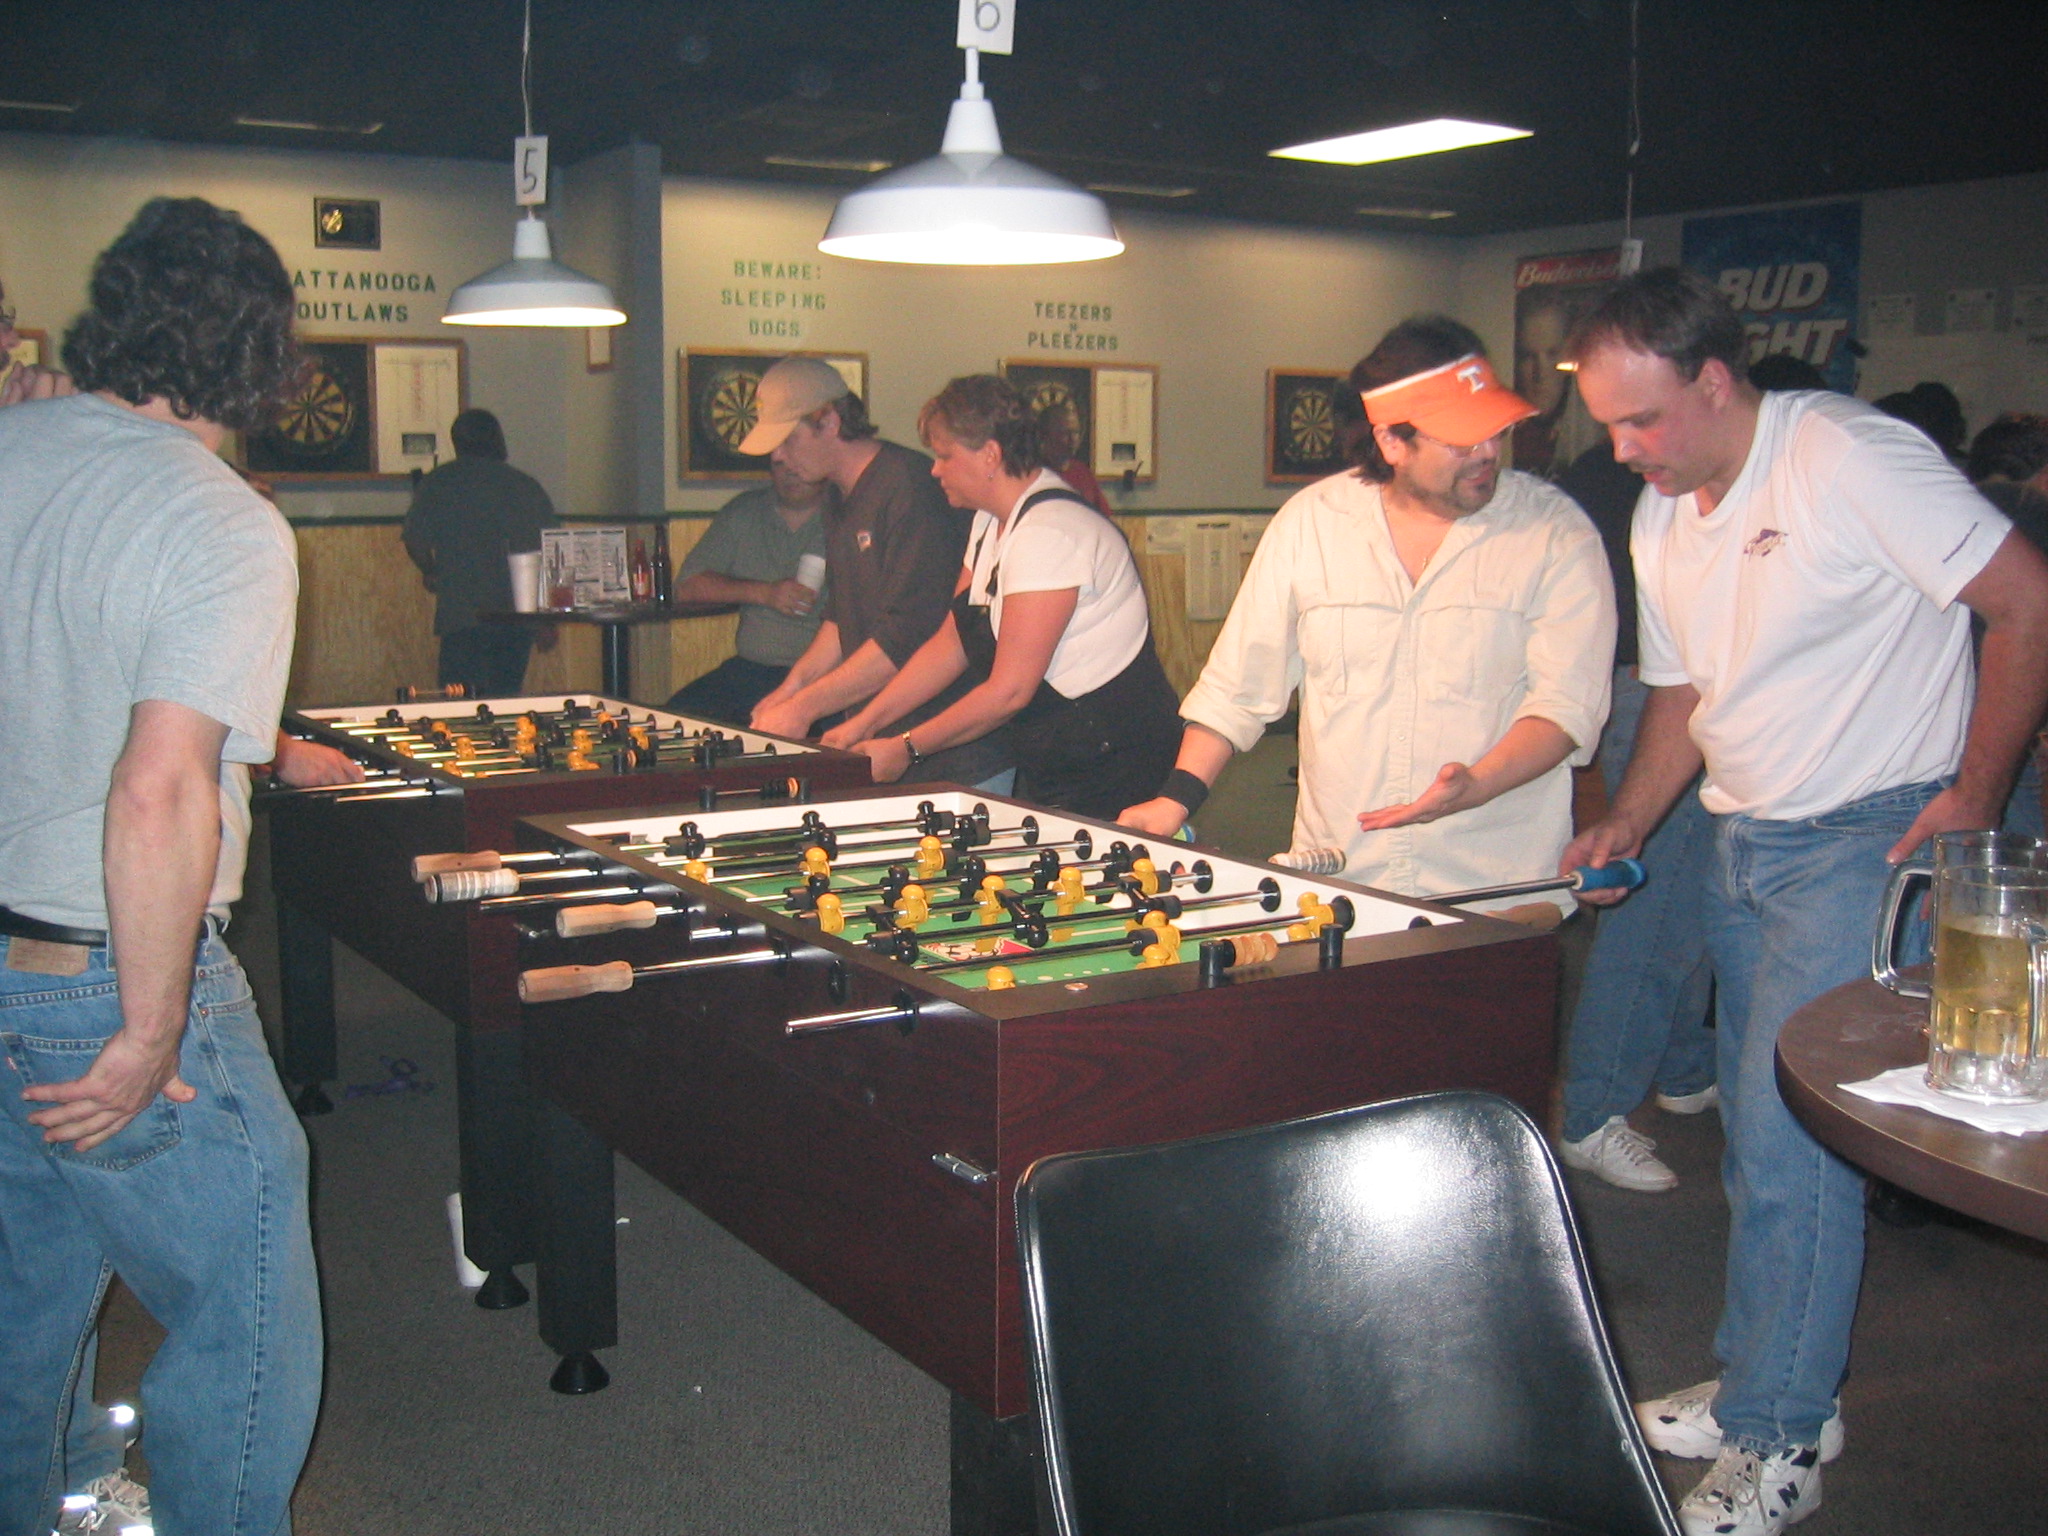 Pictured is action during open doubles competition at Tennessee State 2003.